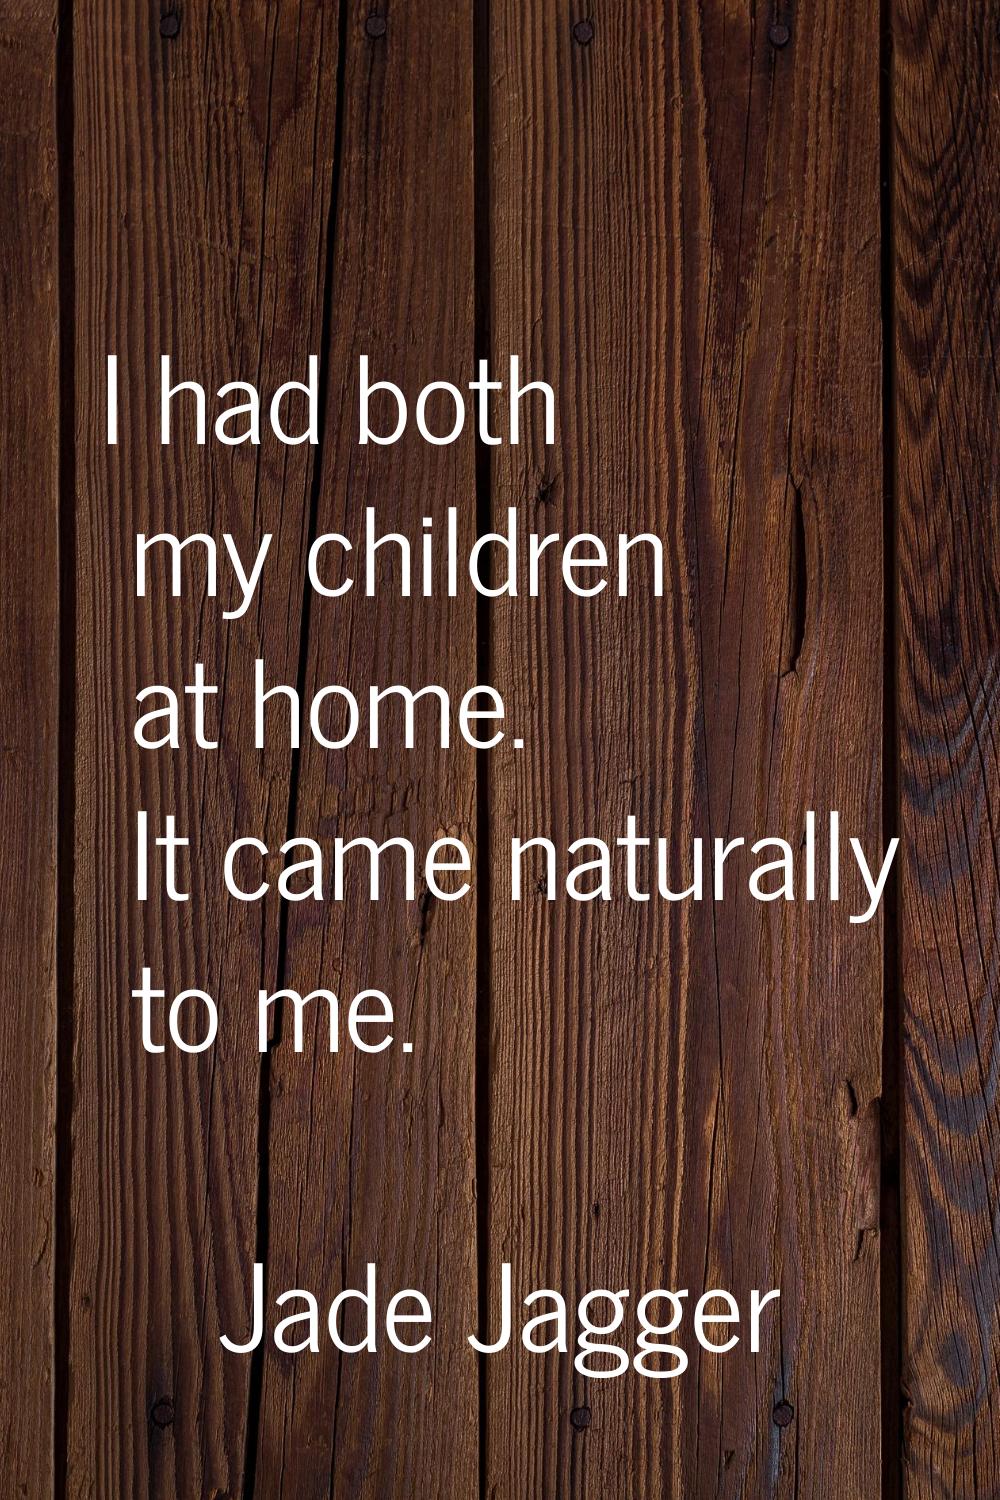 I had both my children at home. It came naturally to me.